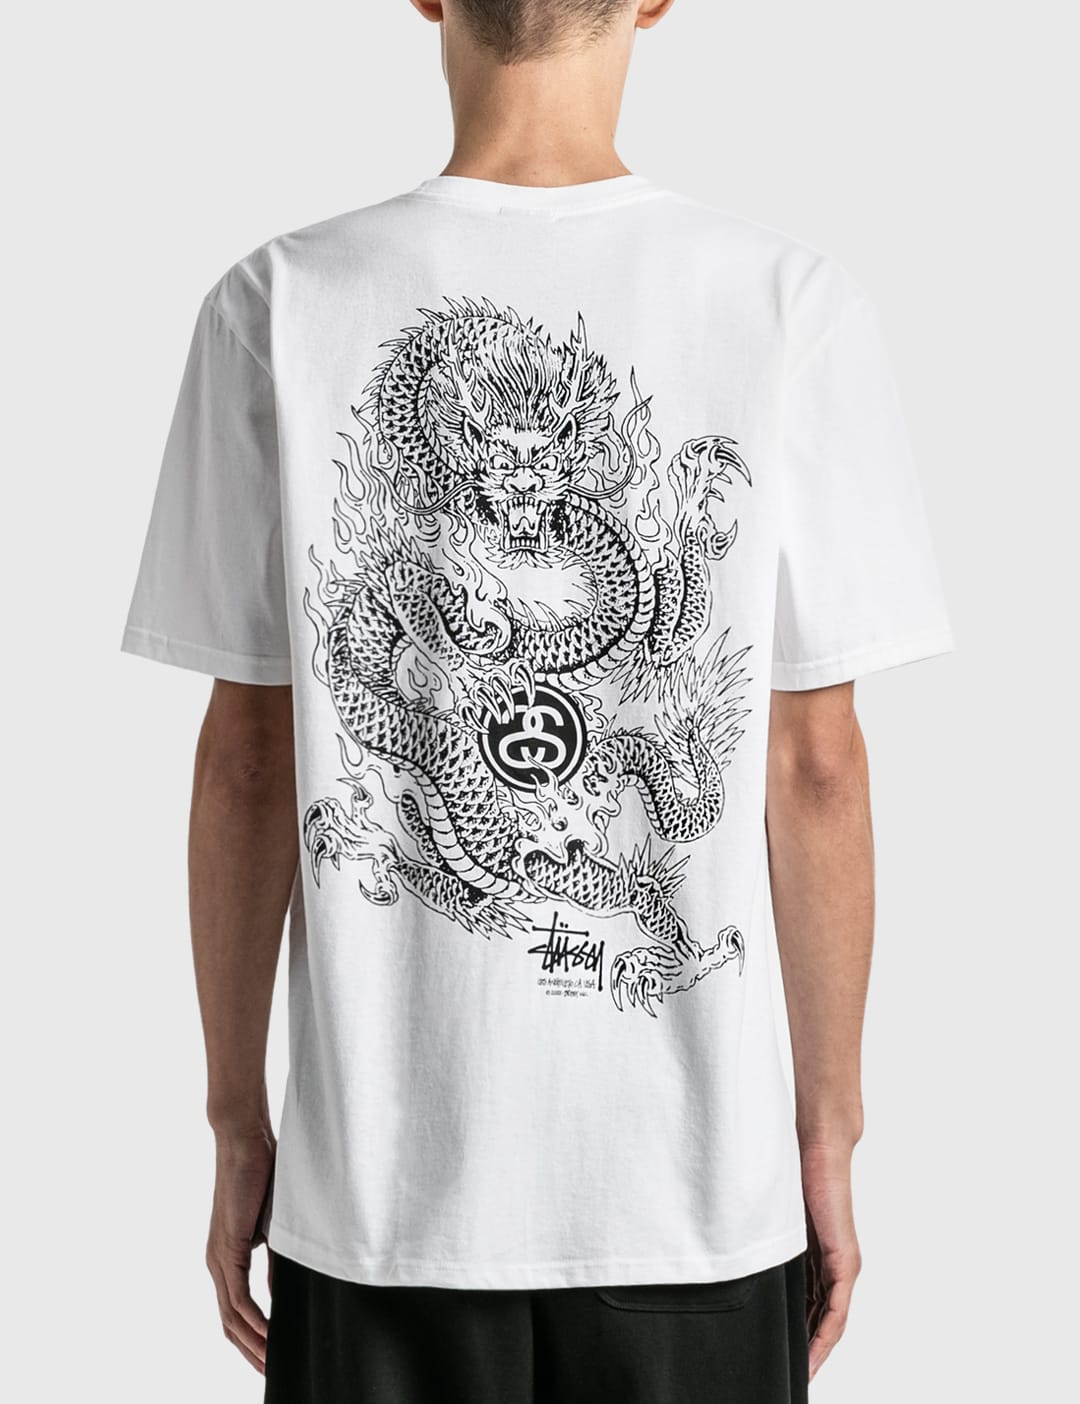 Stüssy - DRAGON T-SHIRT | HBX - Globally Curated Fashion and